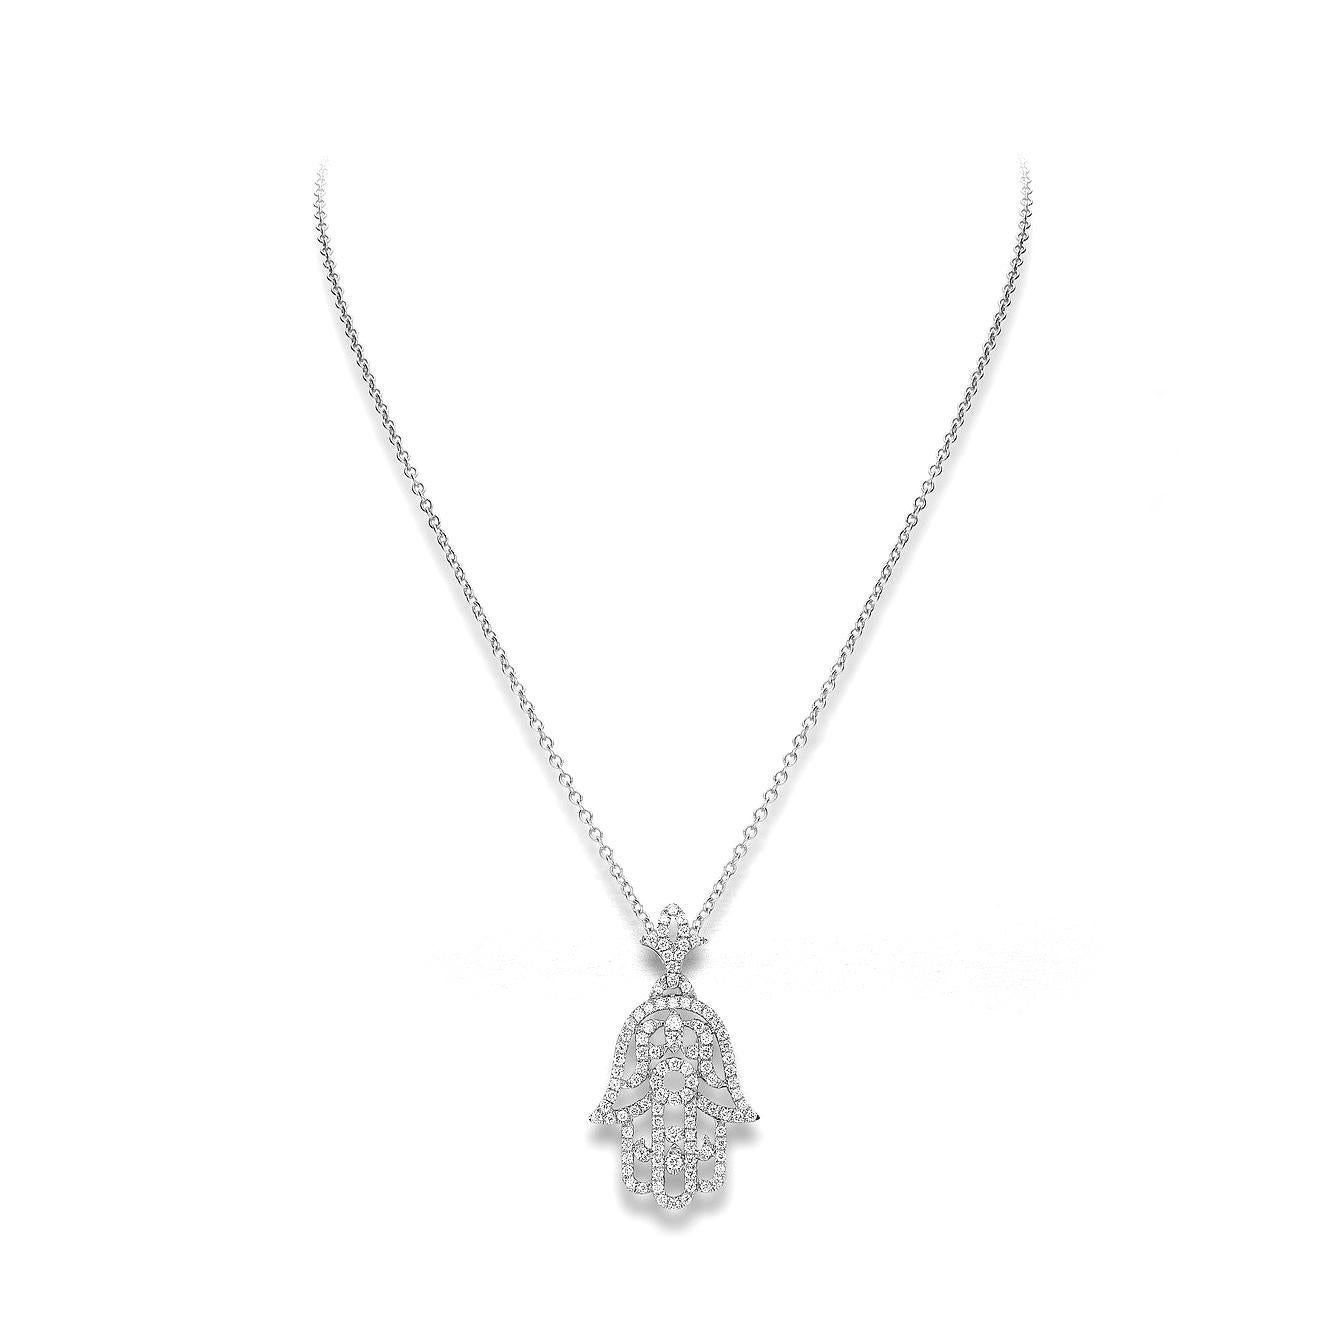 Fatma Hand pendant in 18kt white gold set with 103 diamonds 0.34 cts small model     